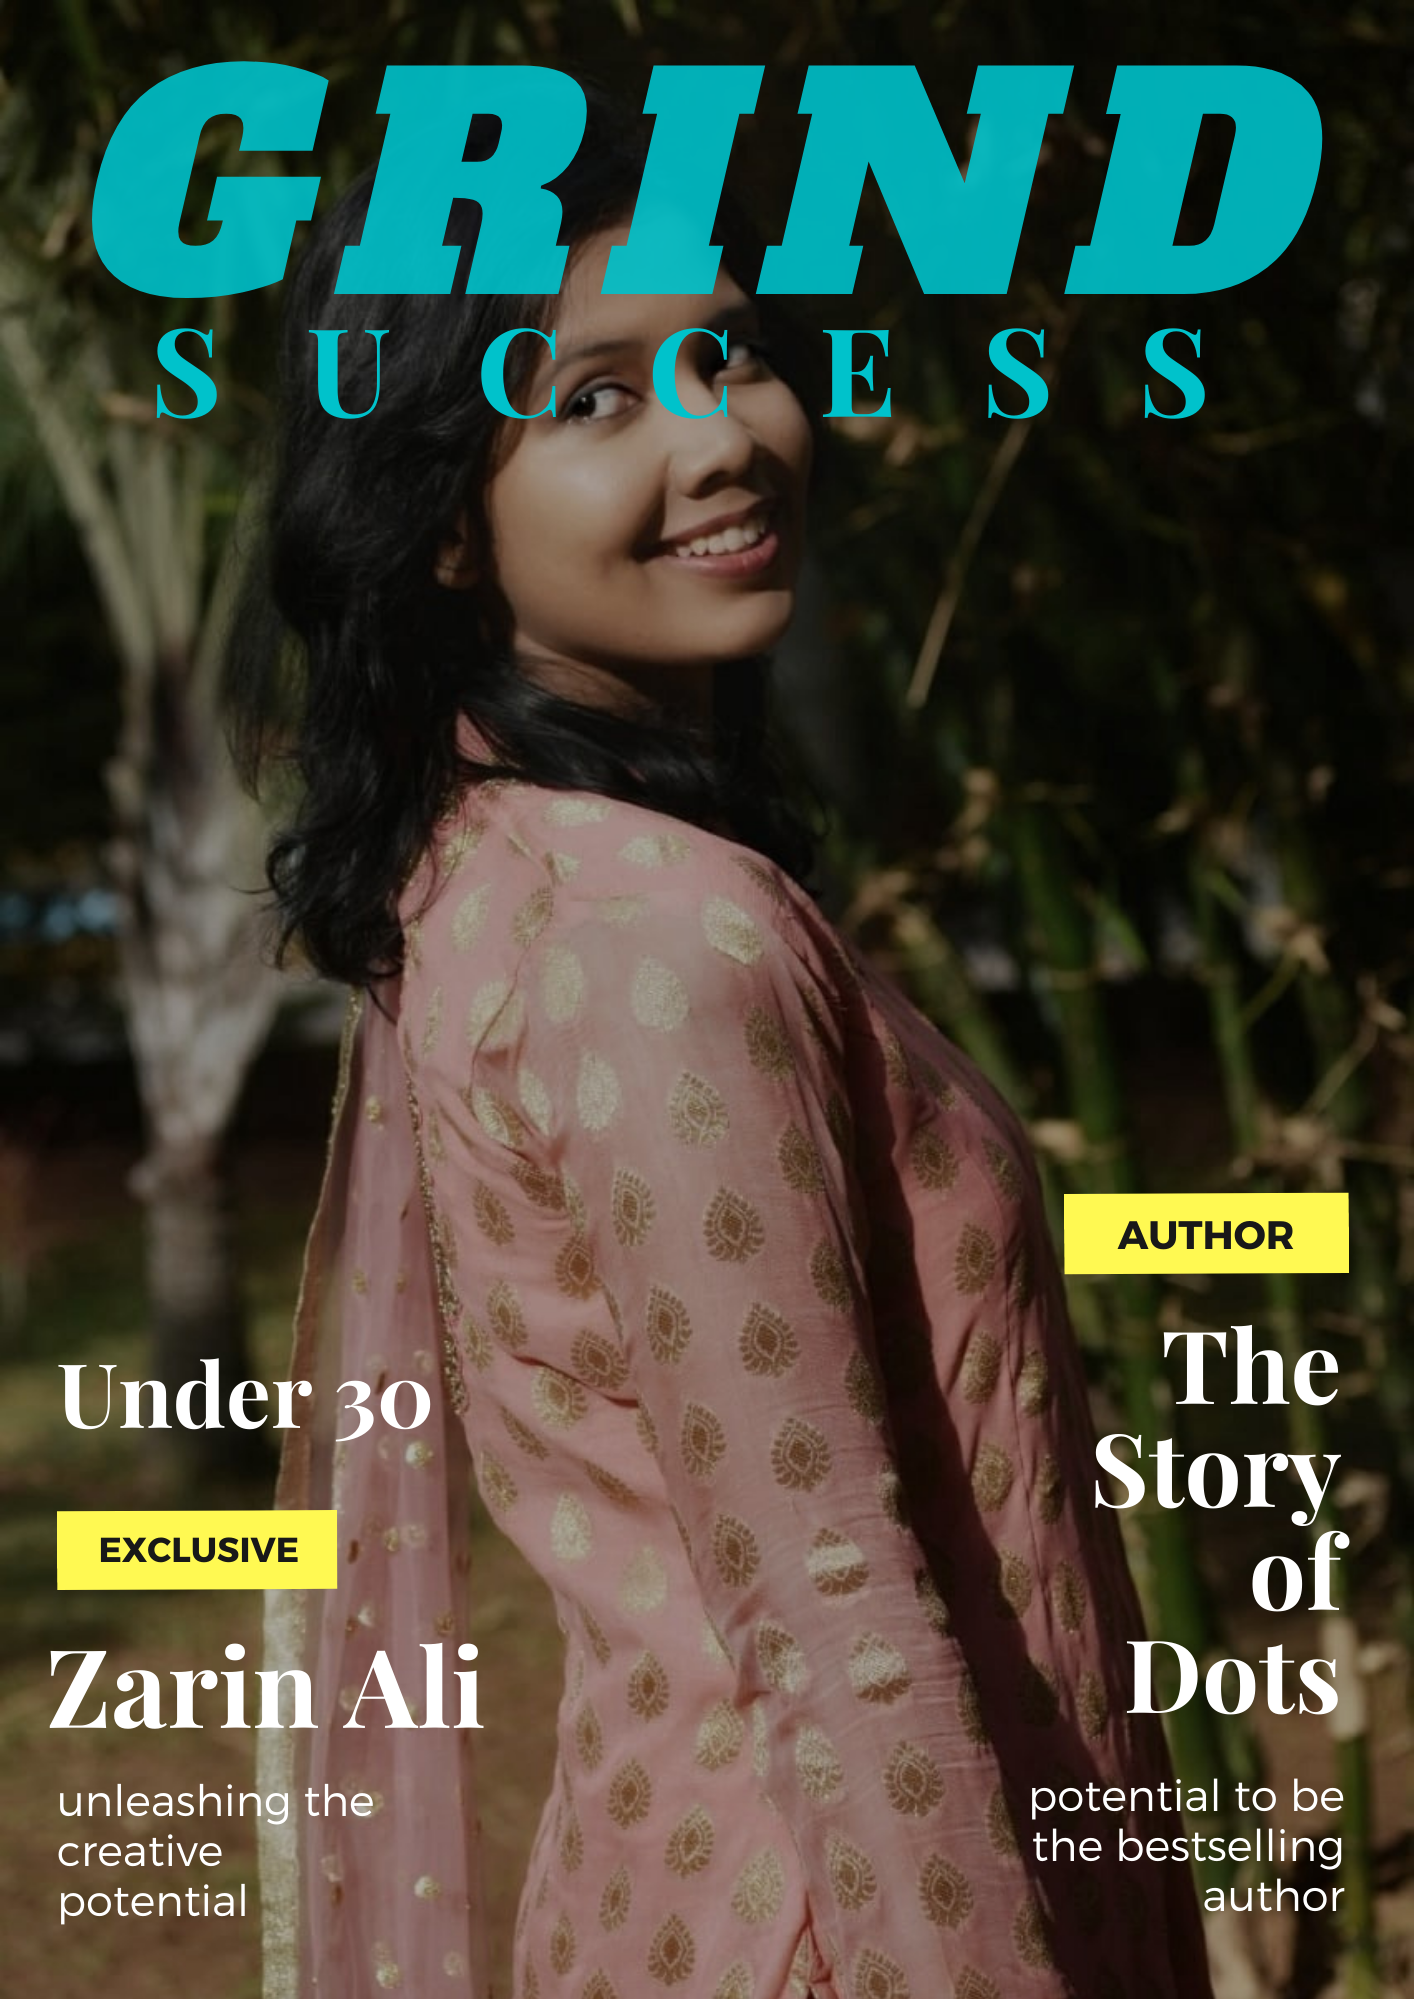 Interview with Zarin Ali, Author of ‘The Story of Dots’